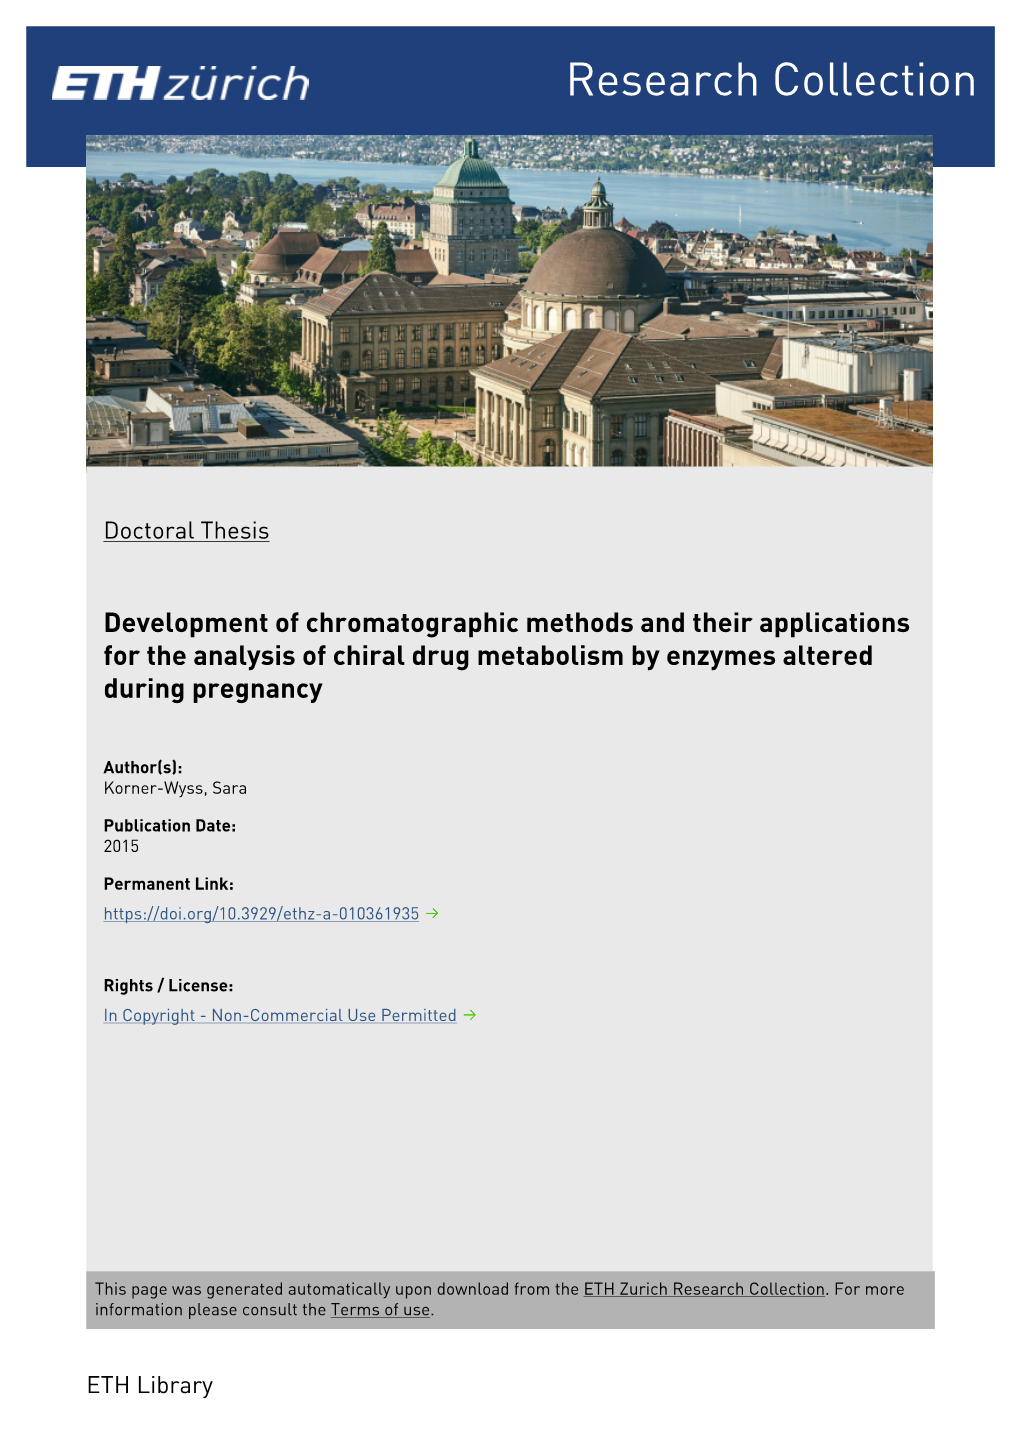 Development of Chromatographic Methods and Their Applications for the Analysis of Chiral Drug Metabolism by Enzymes Altered During Pregnancy